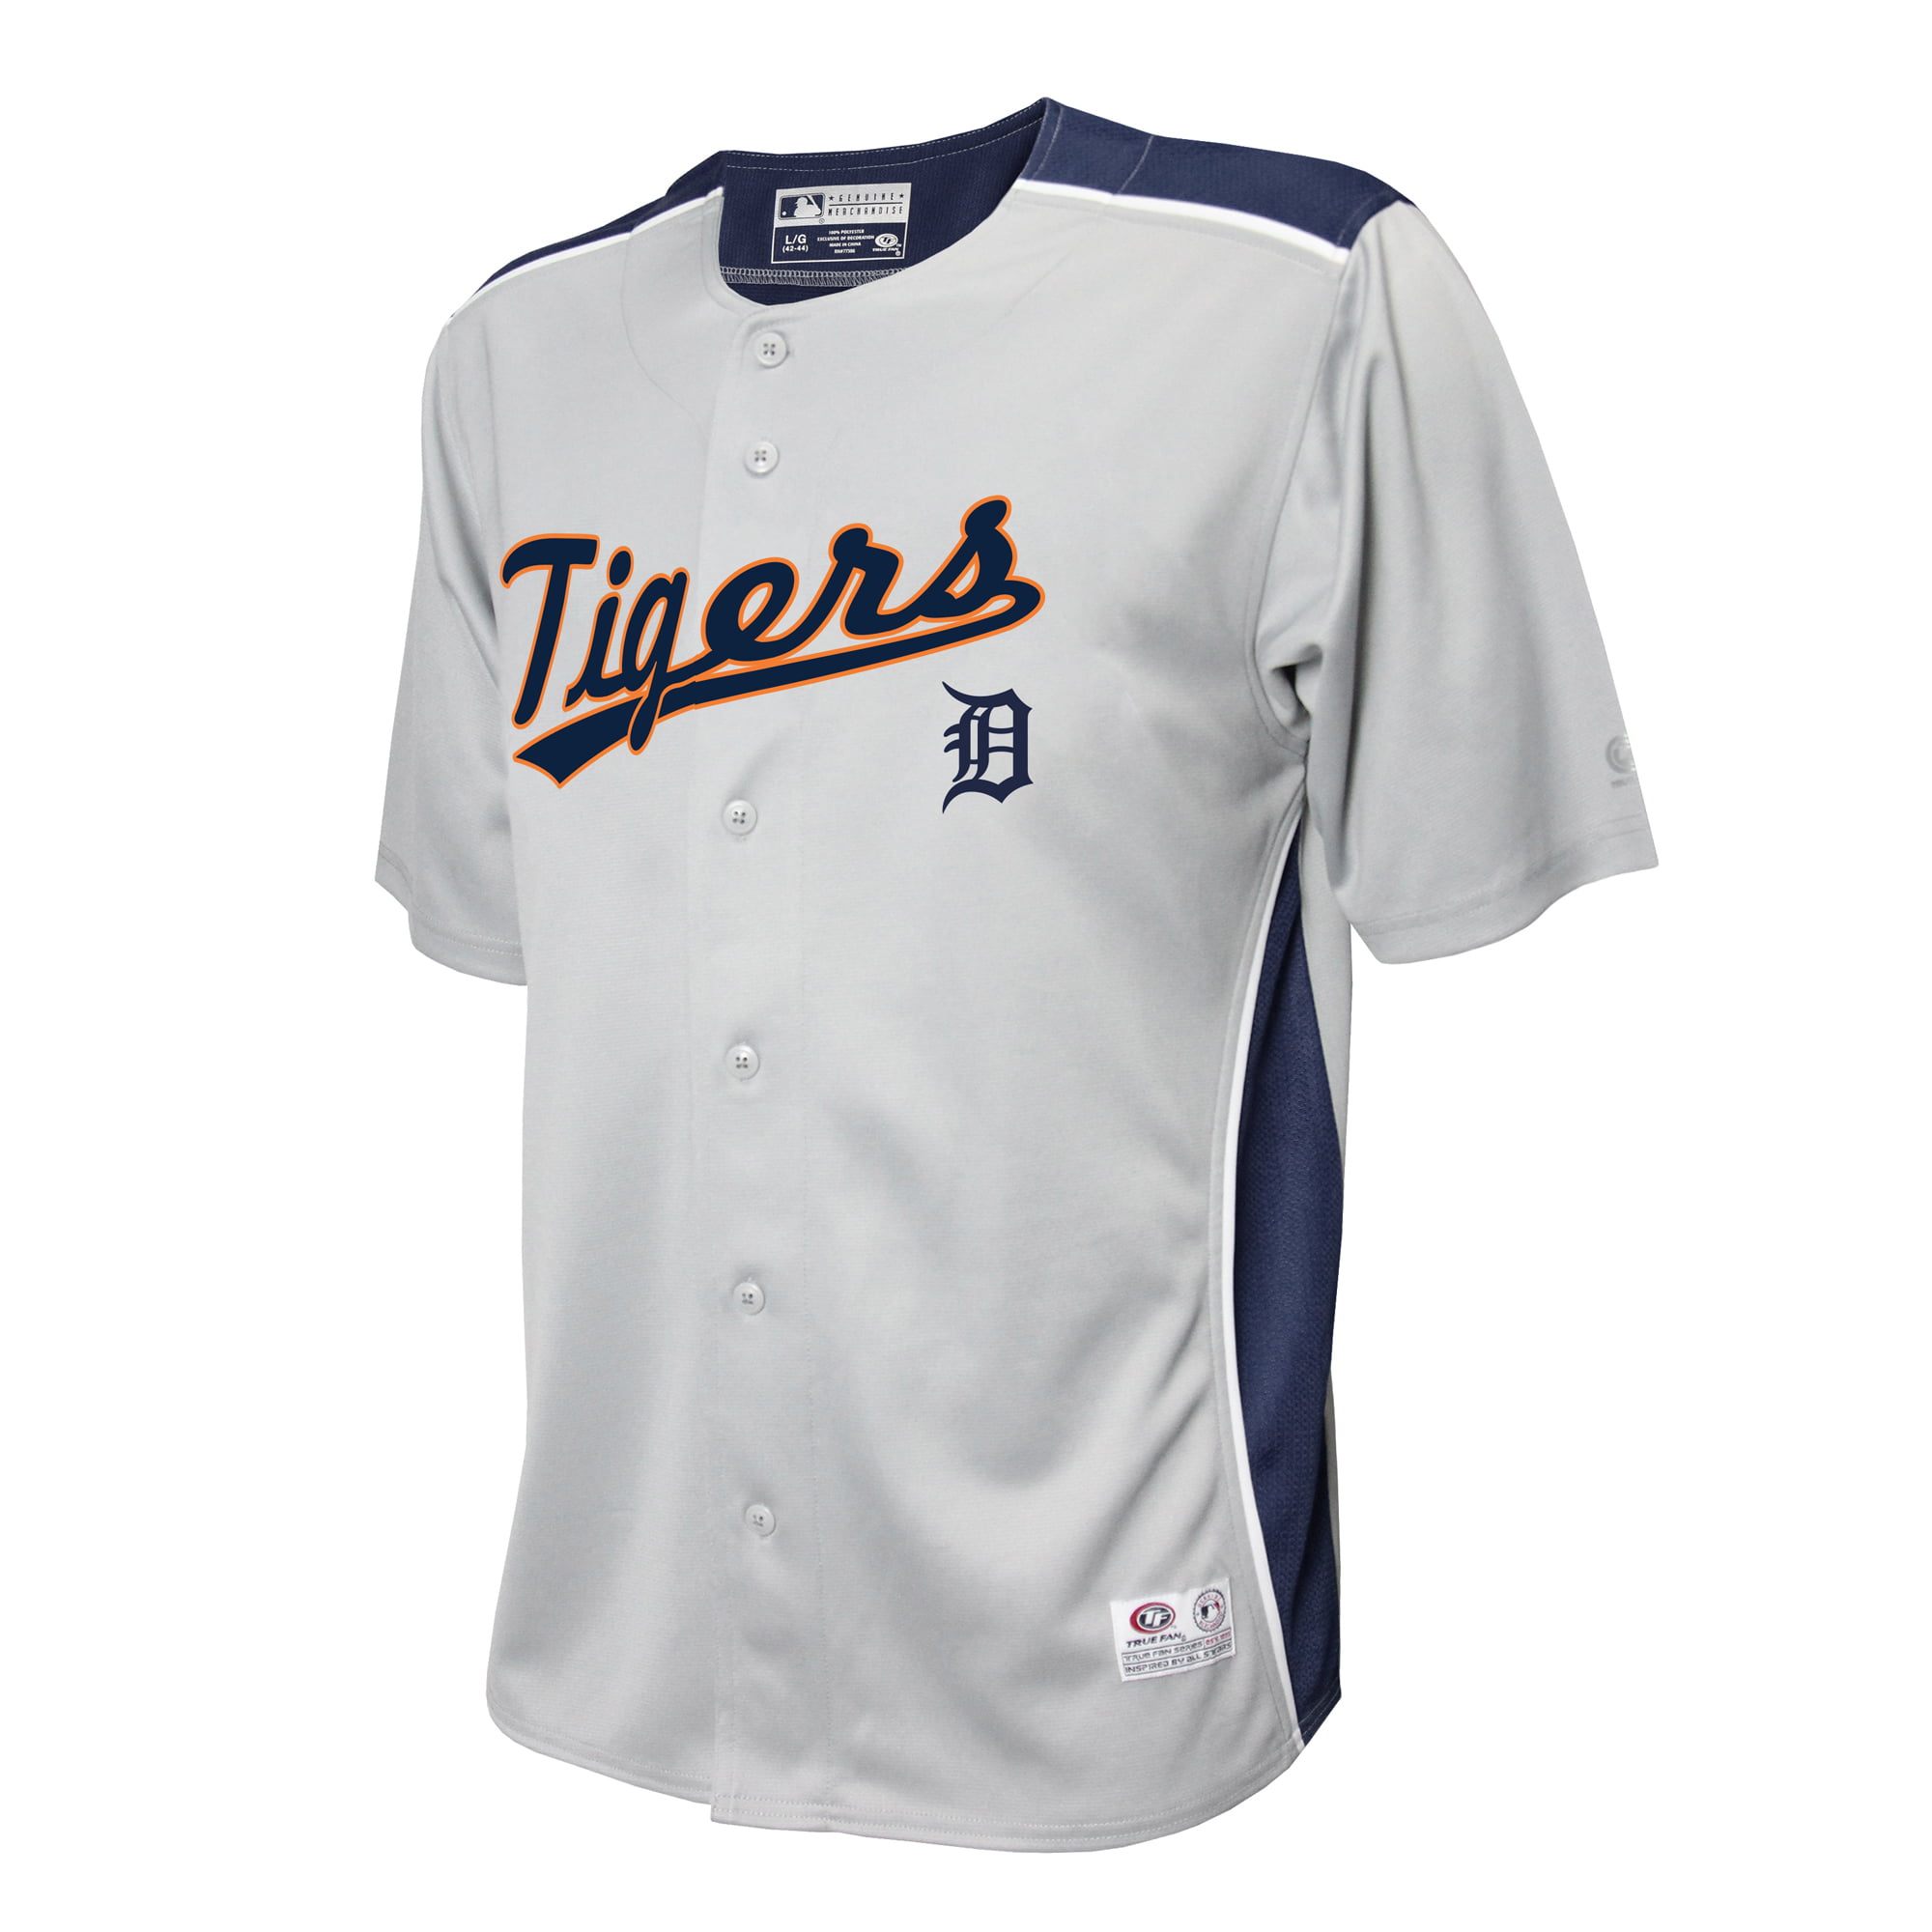 MLB DETROIT TIGERS BUTTON DOWN JERSEY 